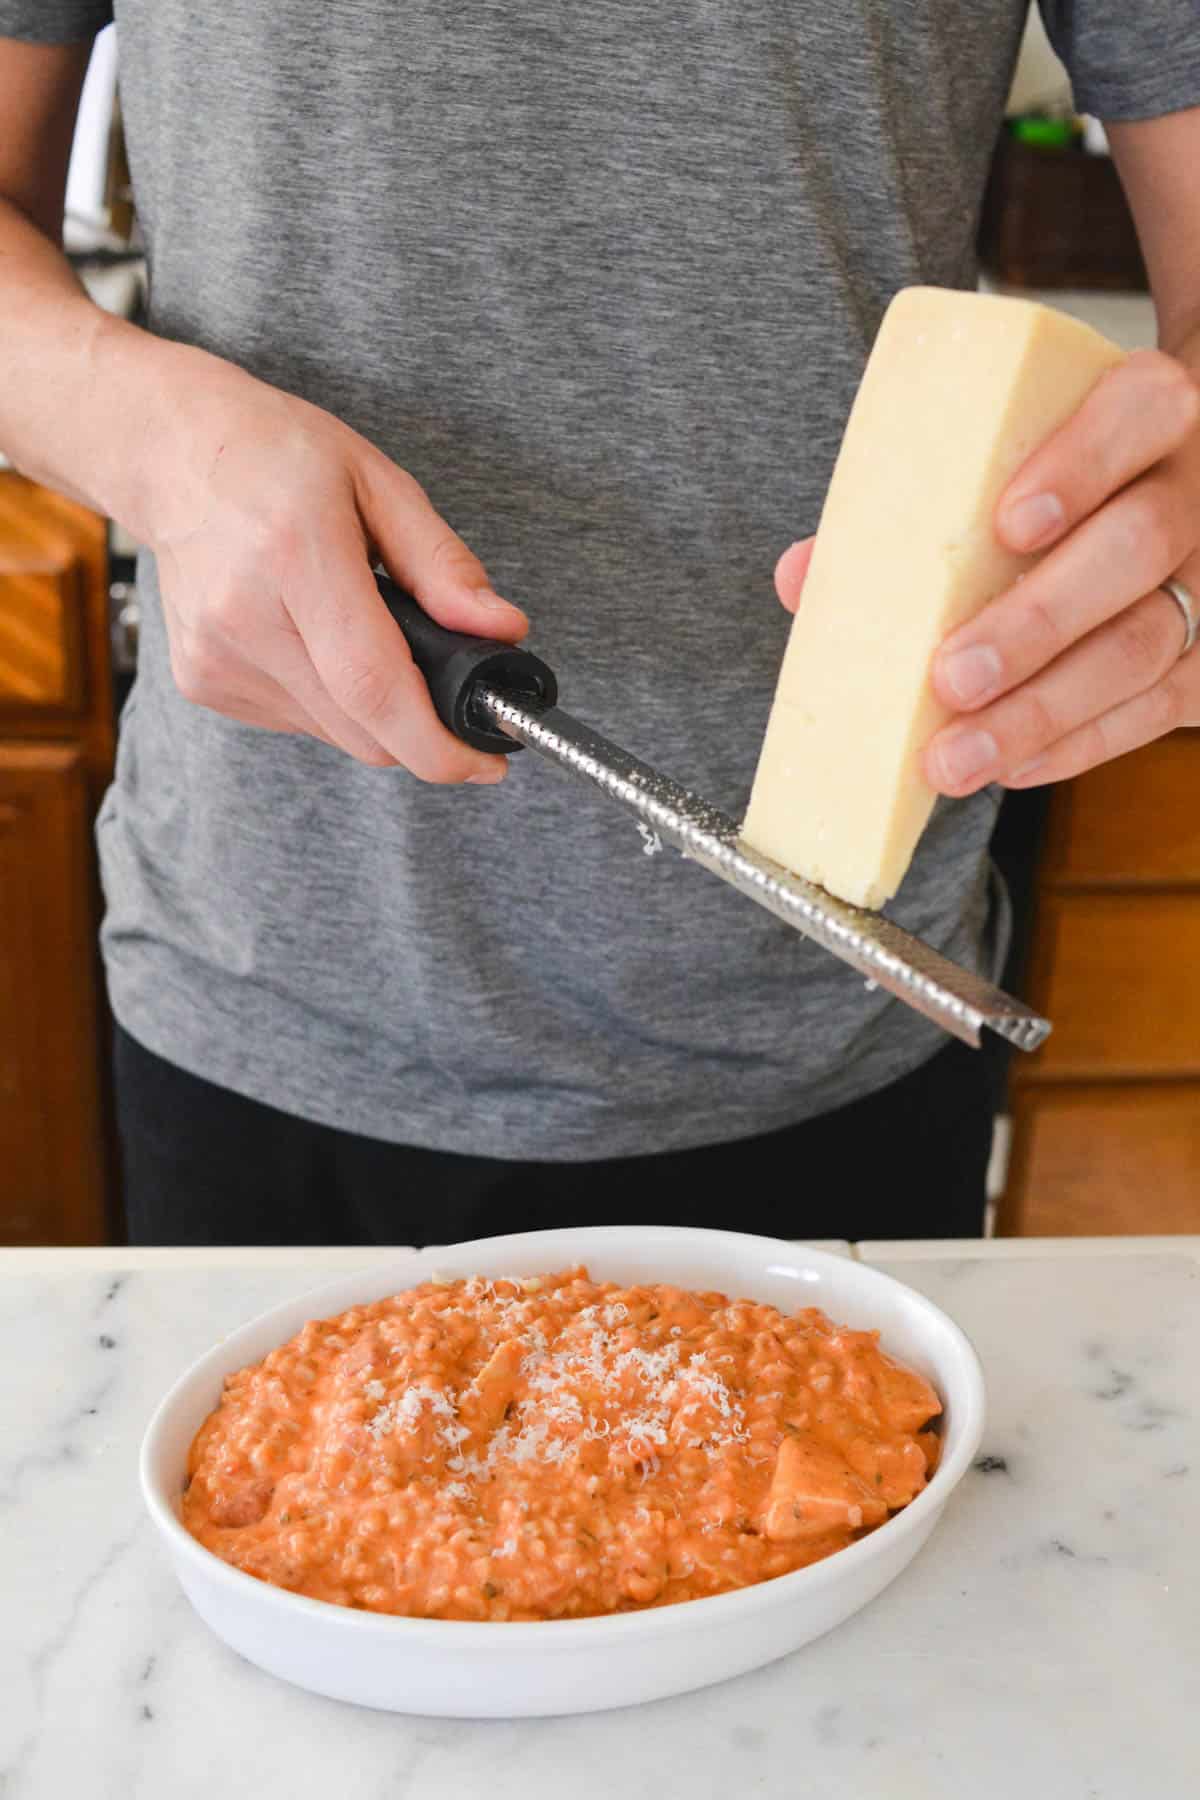 Grating parmesan cheese on top of farro topped with sauce.